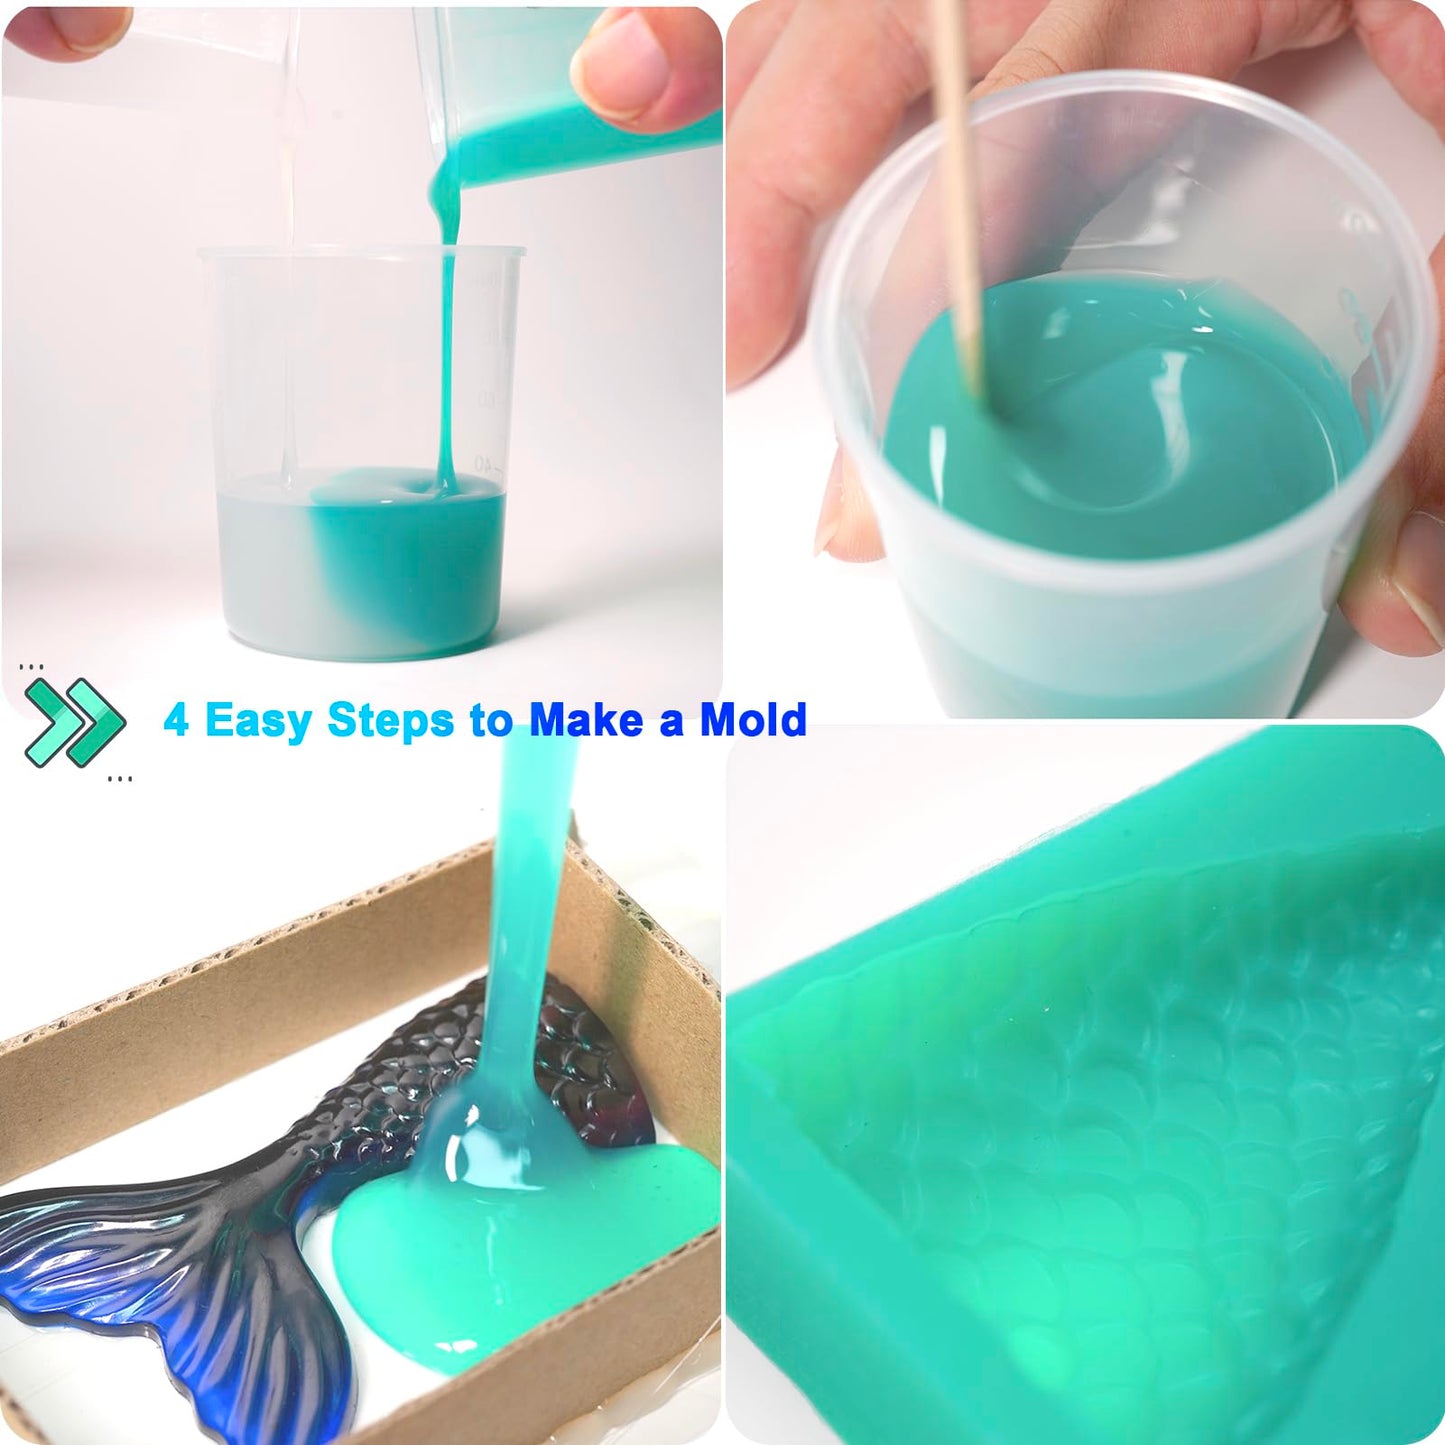 BBDINO Silicone Mold Making Kit, Super Elastic Mold Making Silicone Rubber, Liquid Silicone for Mold Making, N.W. 21.16 oz, 1:1 by Volume, Ideal for